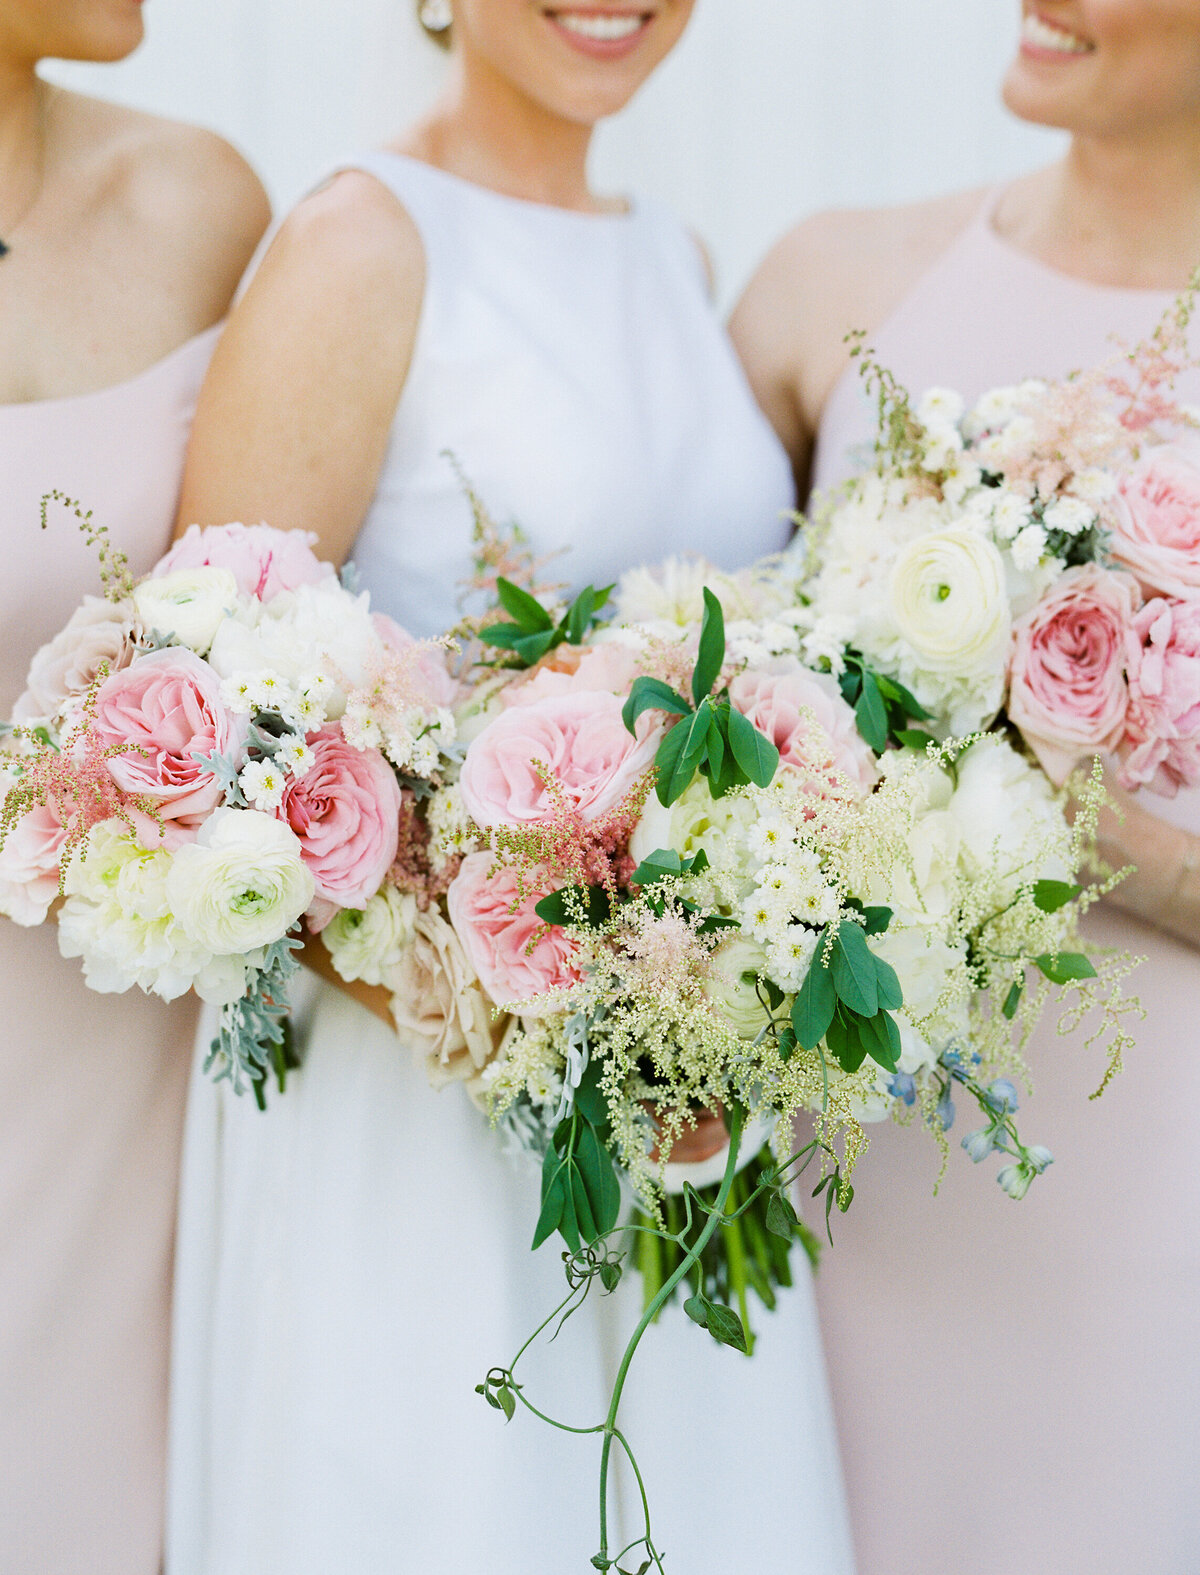 Close-up of a bride and bridesmaids holding pink and white bouquets